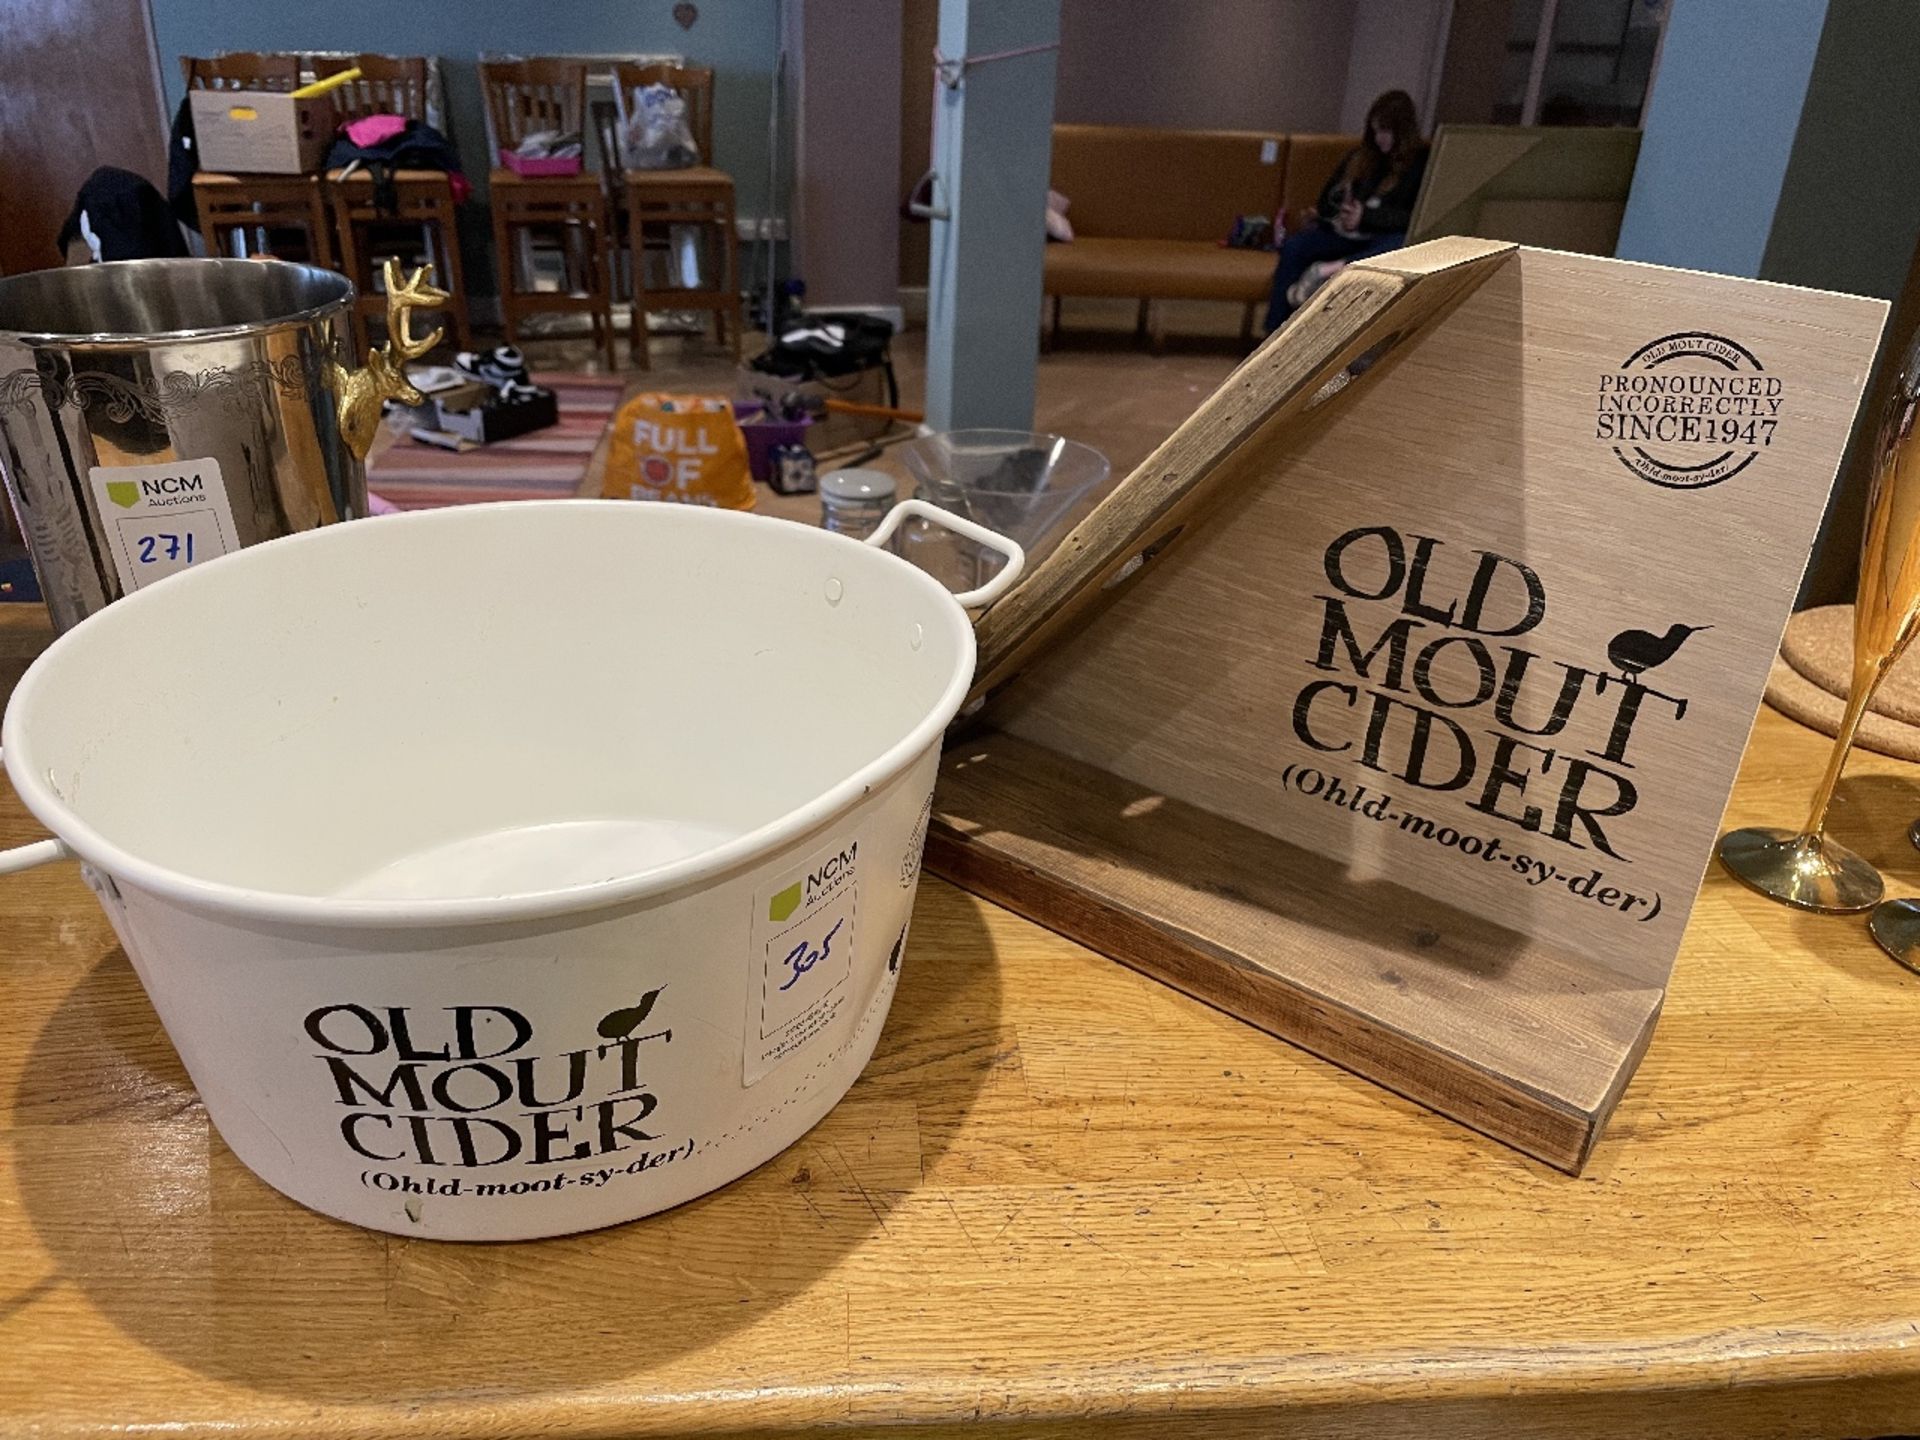 Old Mout Cider Display Items